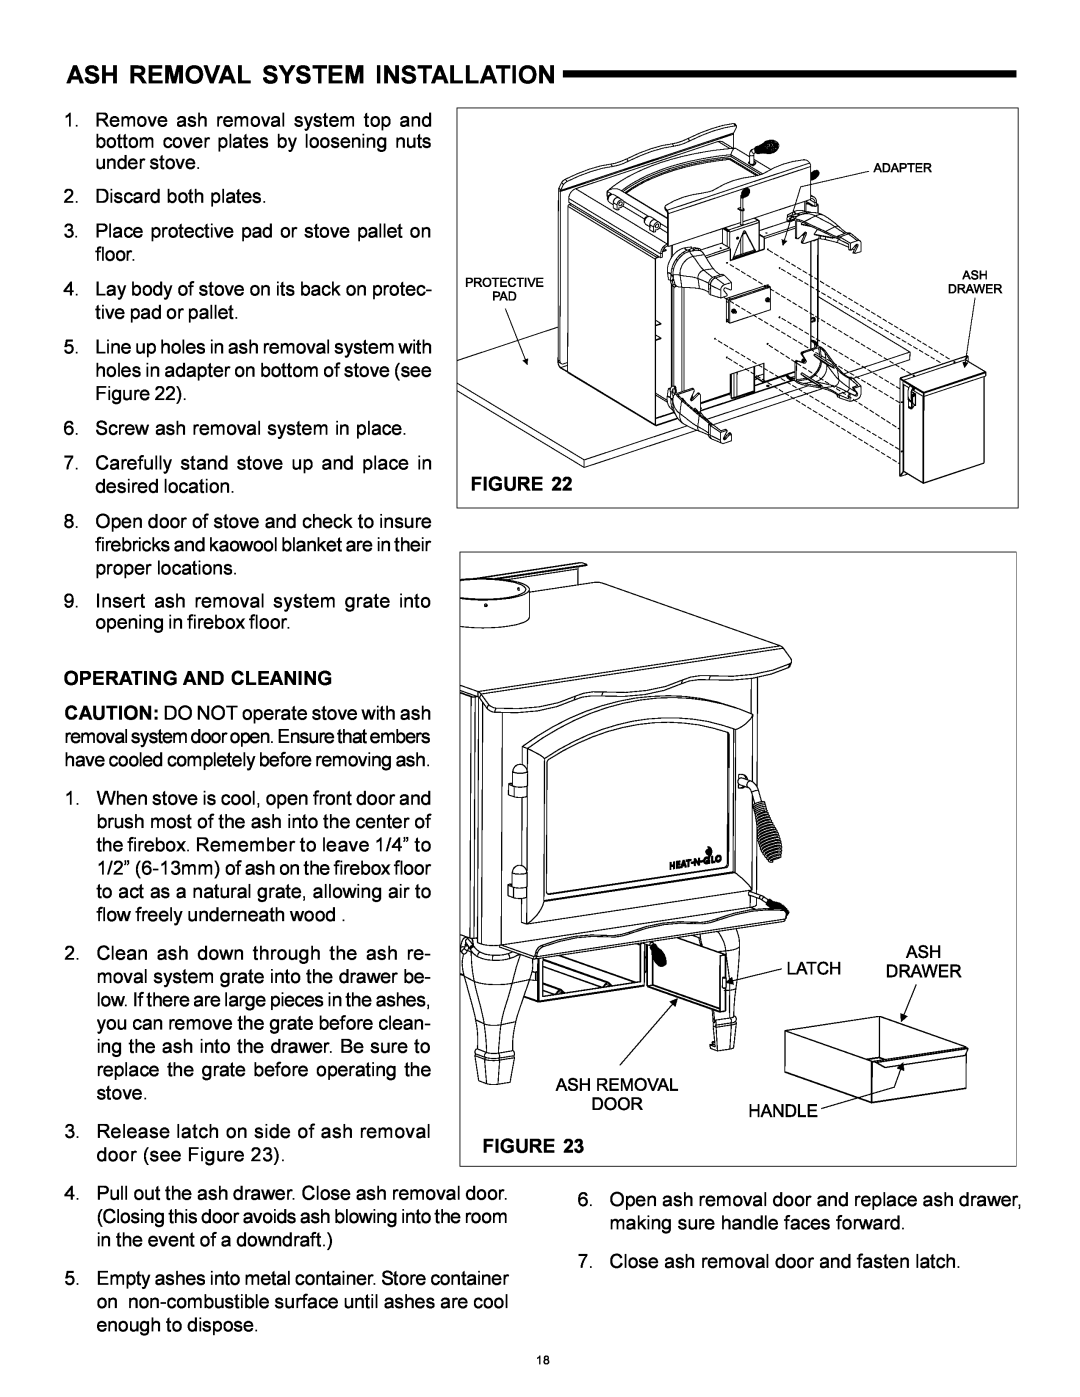 Heat & Glo LifeStyle WS-150, WS-250 installation instructions Ash Removal System Installation, Operating And Cleaning 